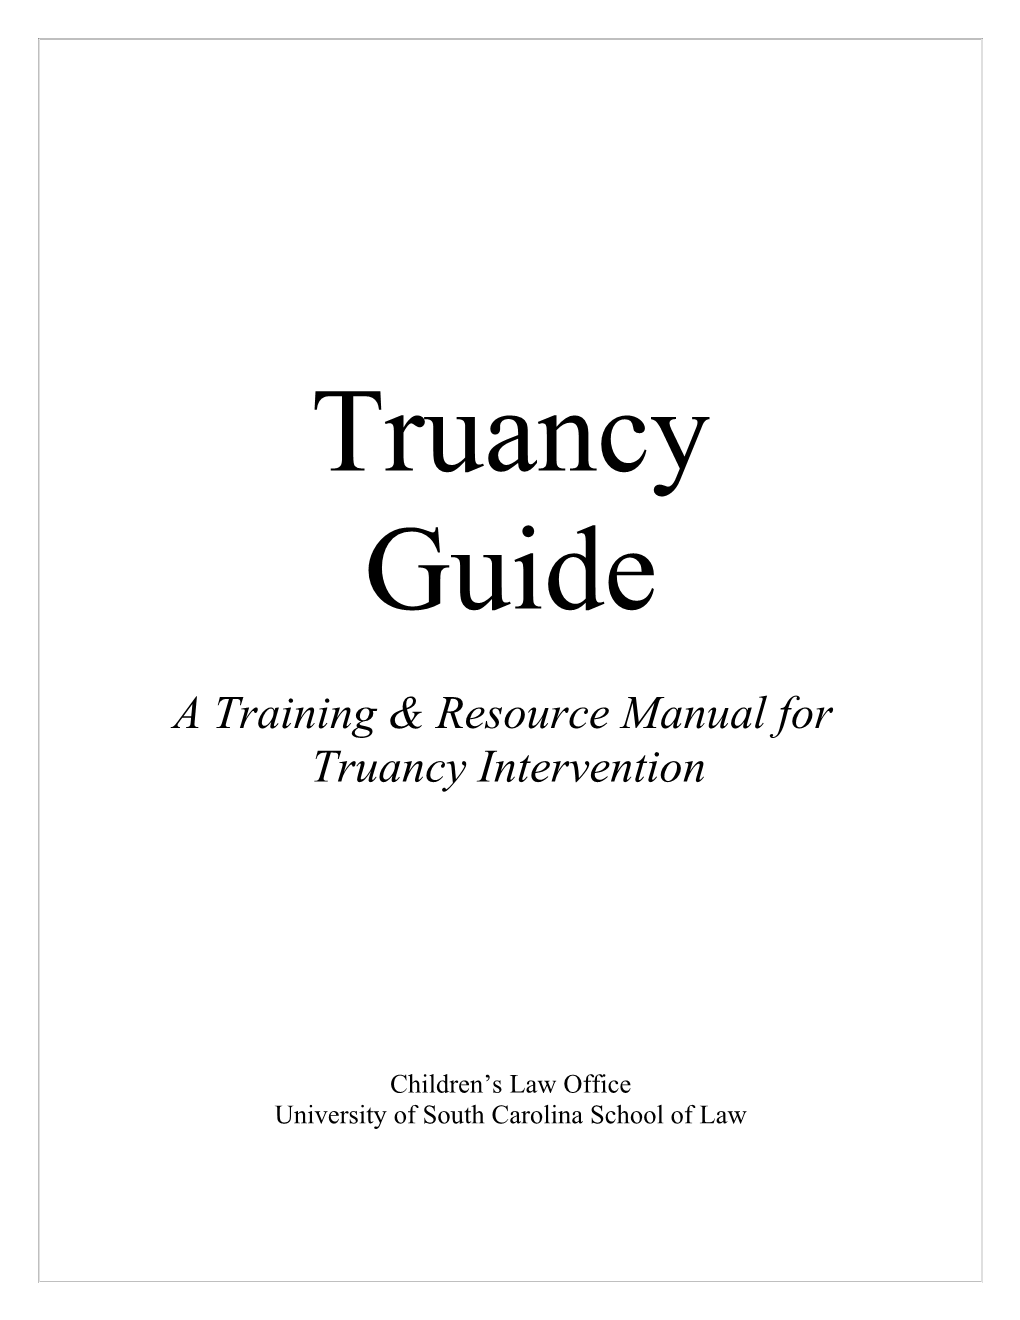 A Training & Resource Manual For